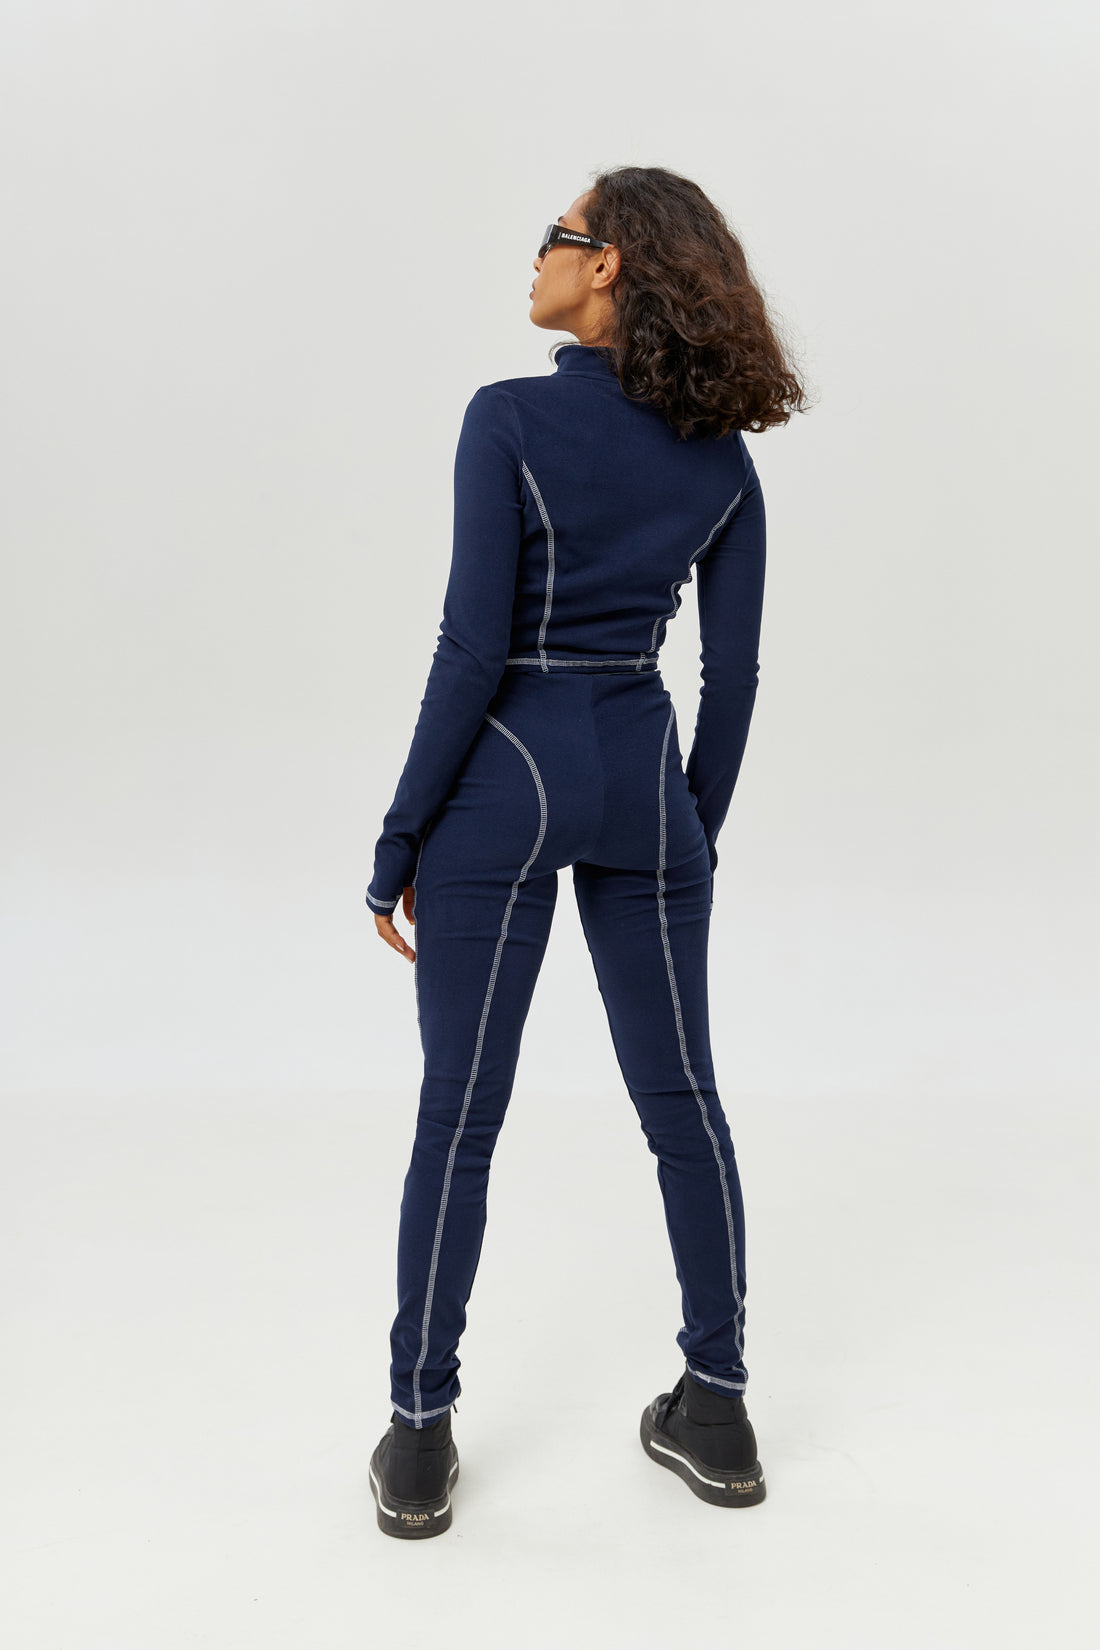 Base layers for skiing women's - Navy blue two piece set for winter - Best thermals for women